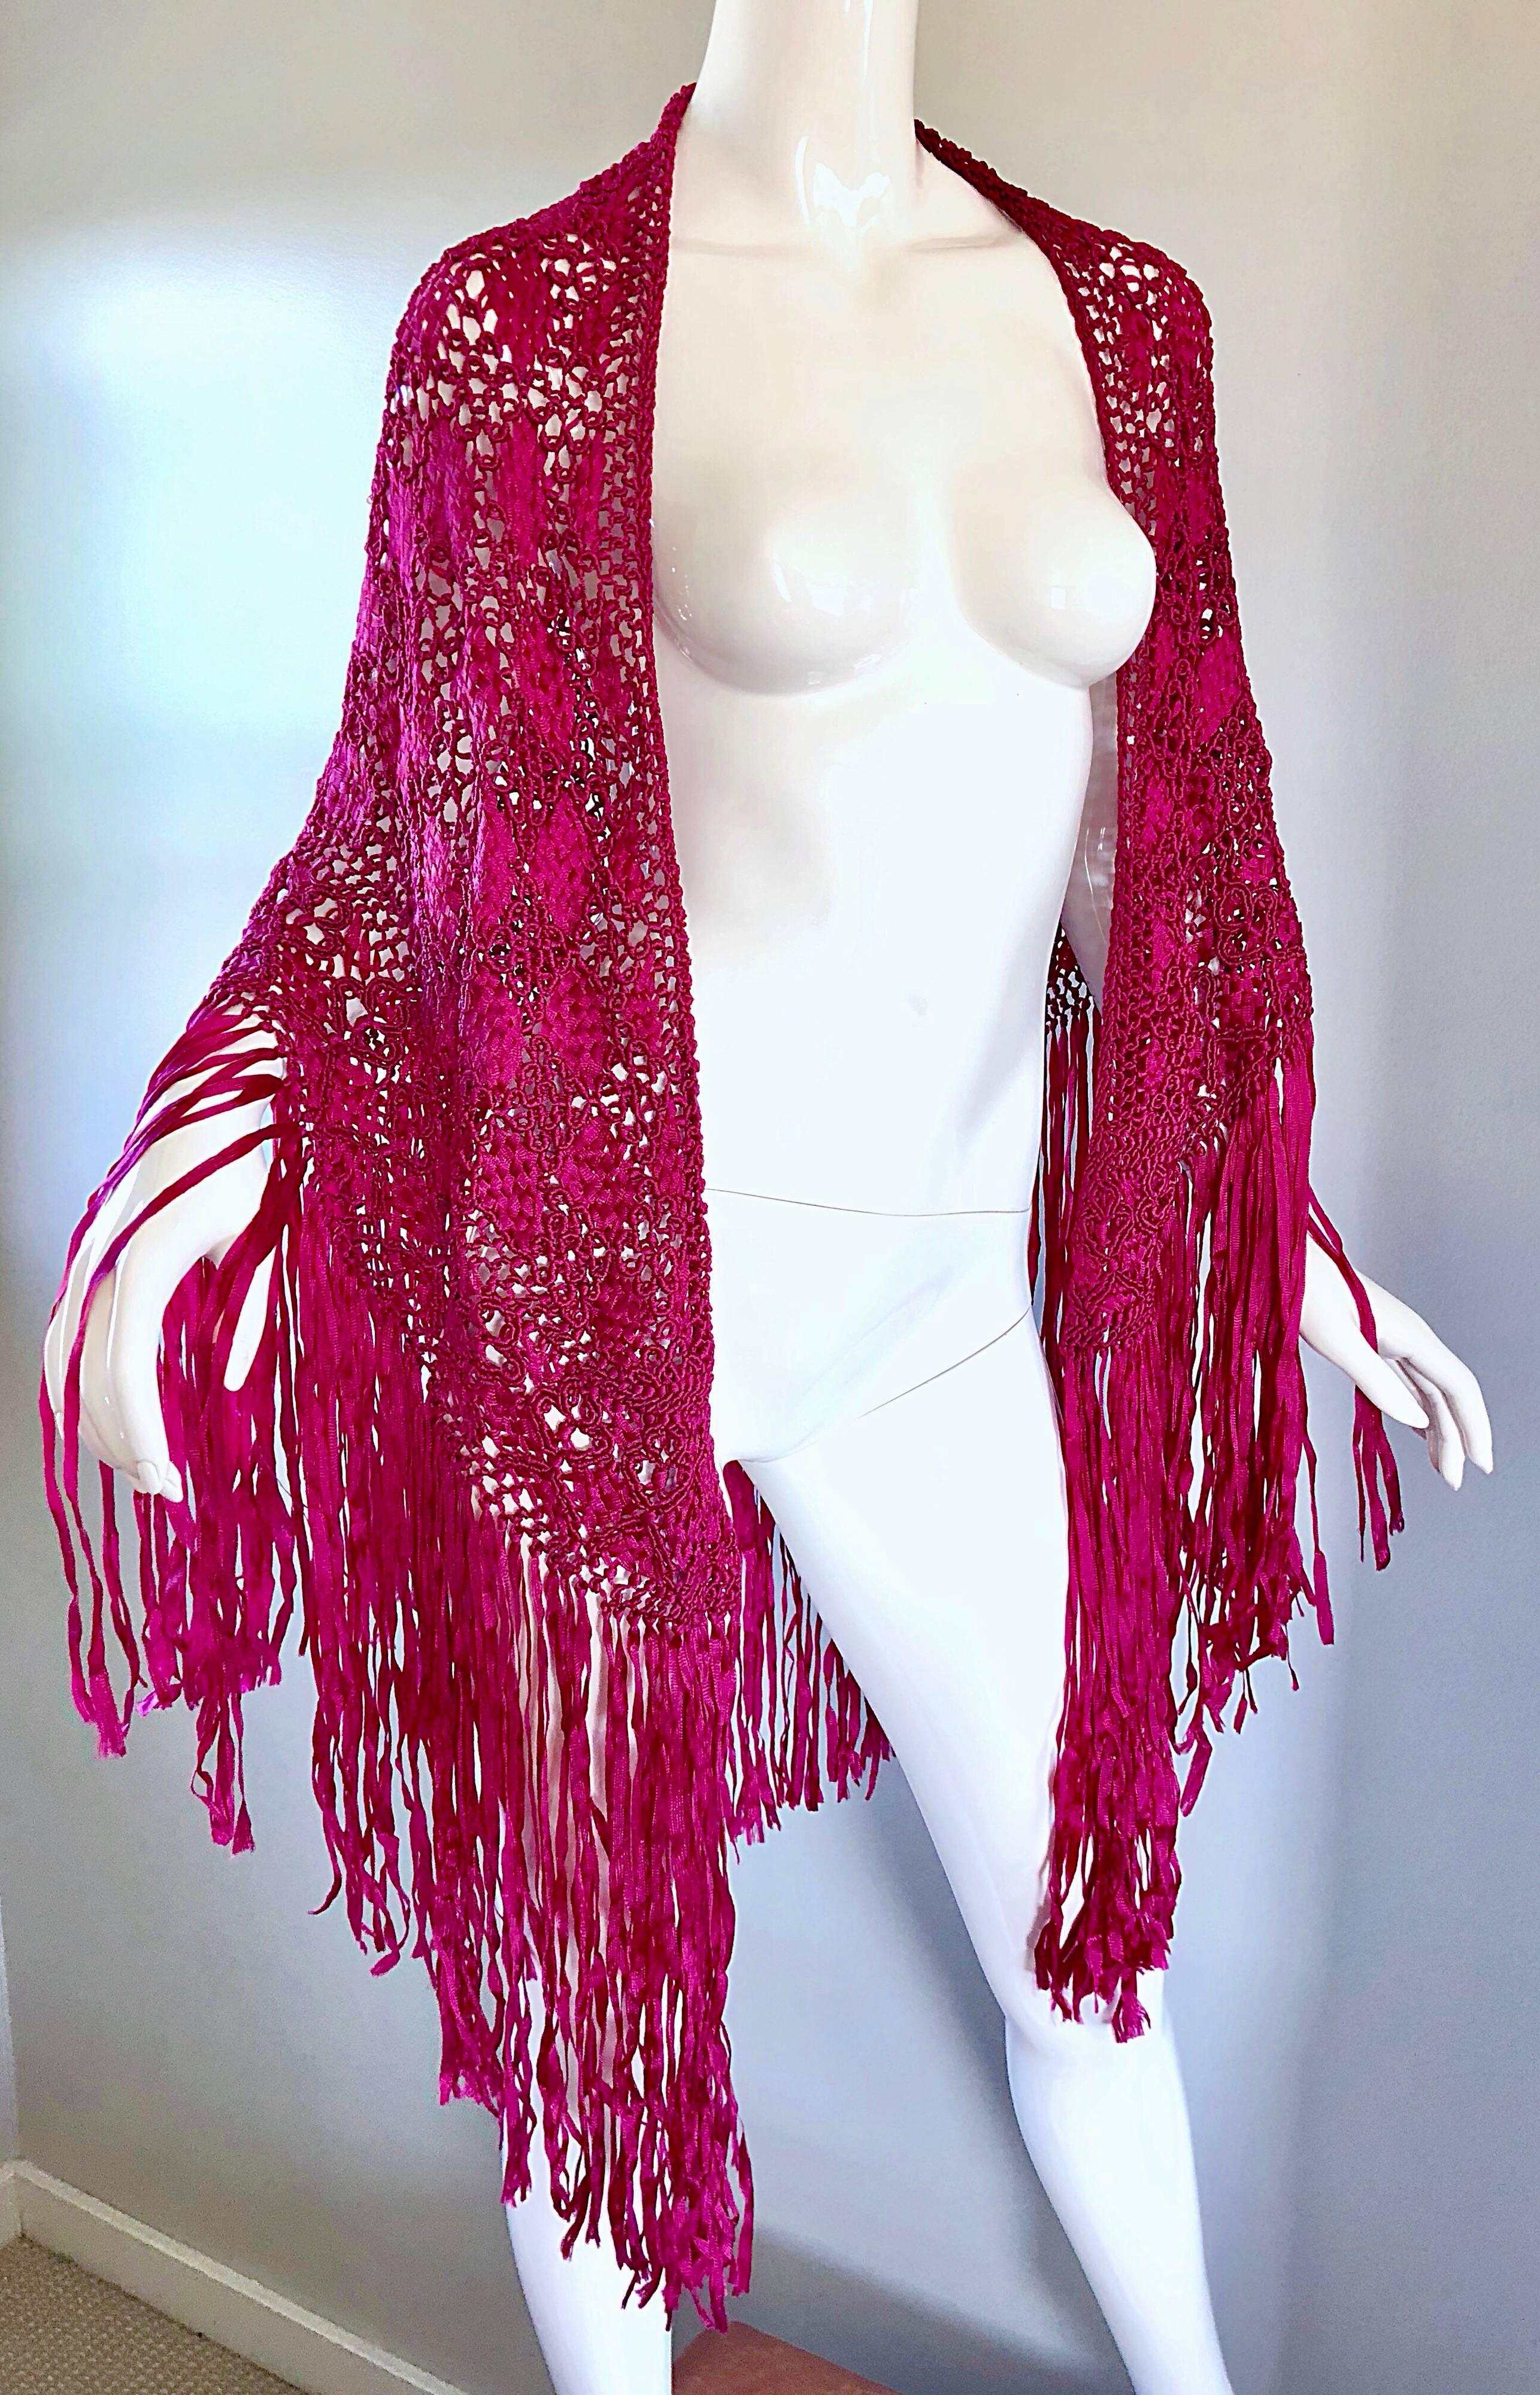 Lovely 1970s hand woven fuchsia hot pink rayon crochet extra large piano shawl! The perfect accessory to add to any outfit / ensemble! Dramatic fringe and elaborate craftmanship. In great condition. 